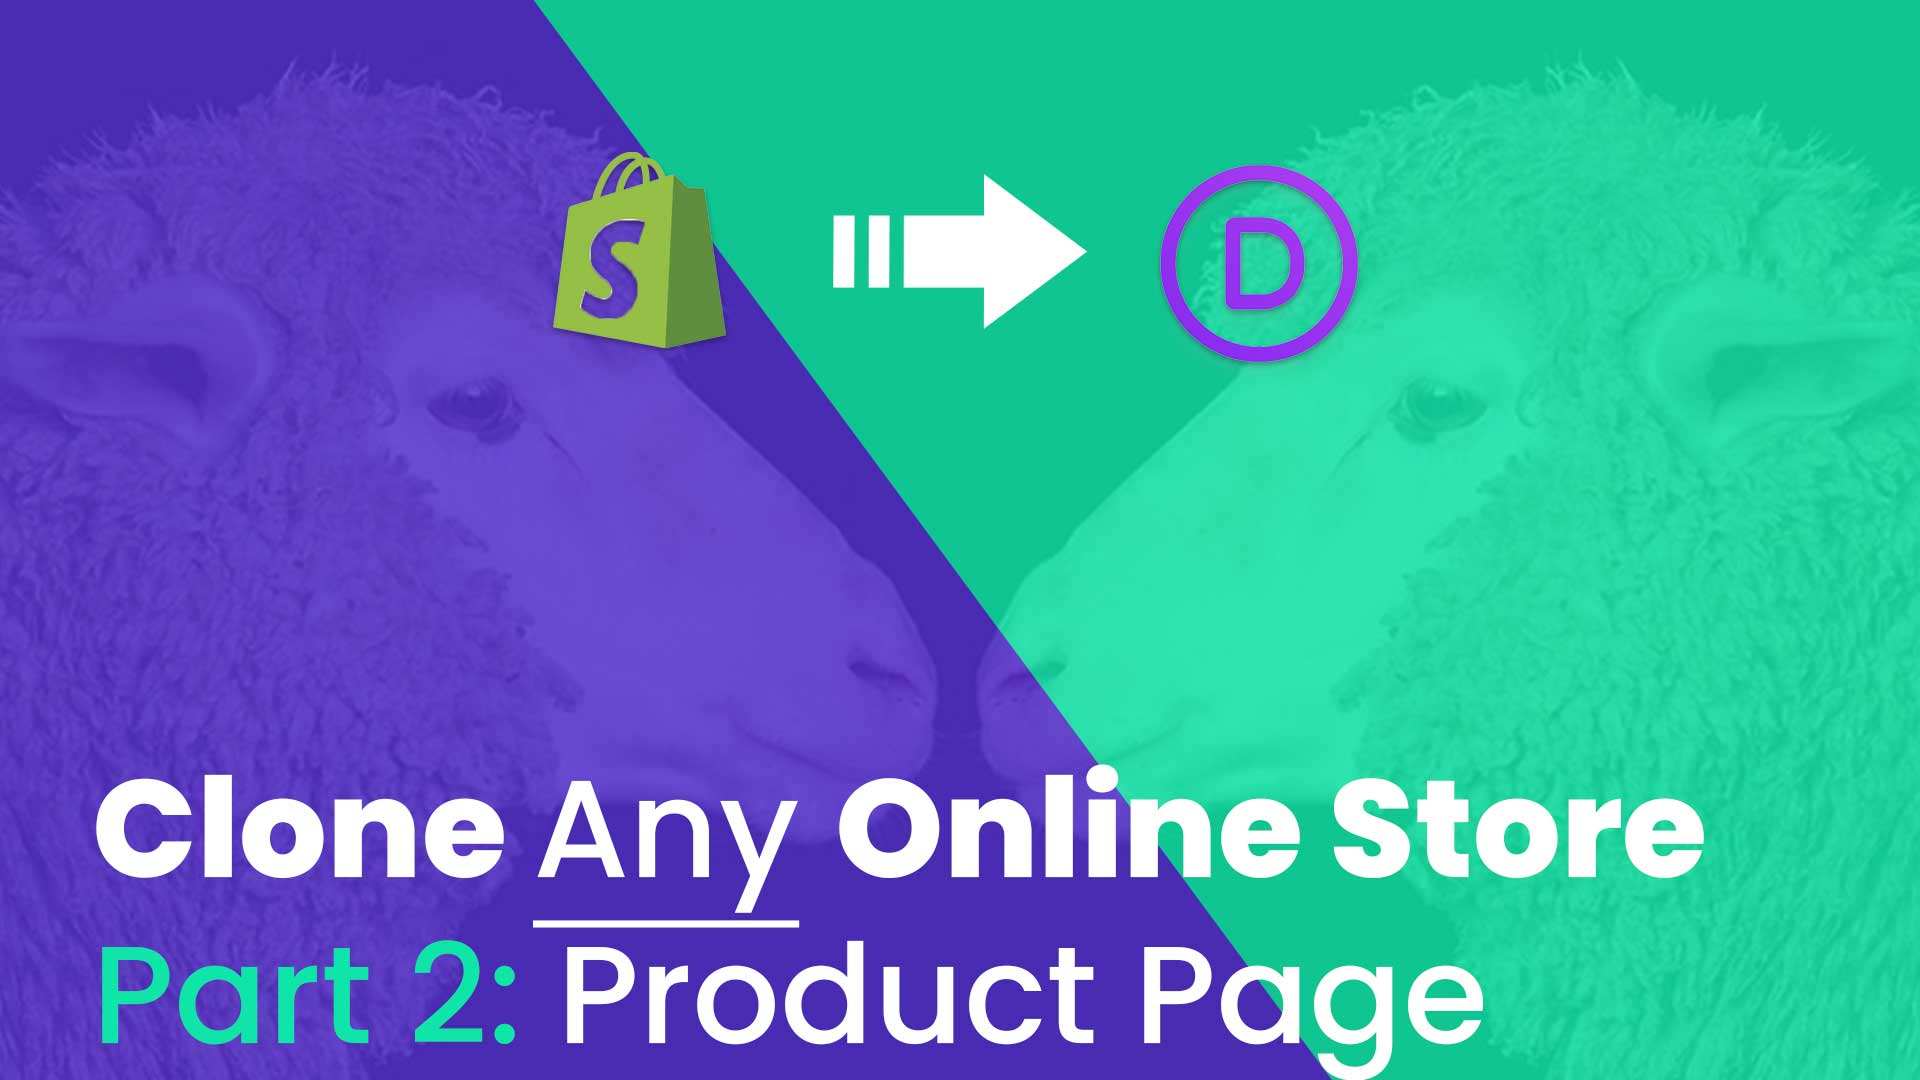 Clone Any Online Store Tutorial Series: Part 2 – Building the Product Page